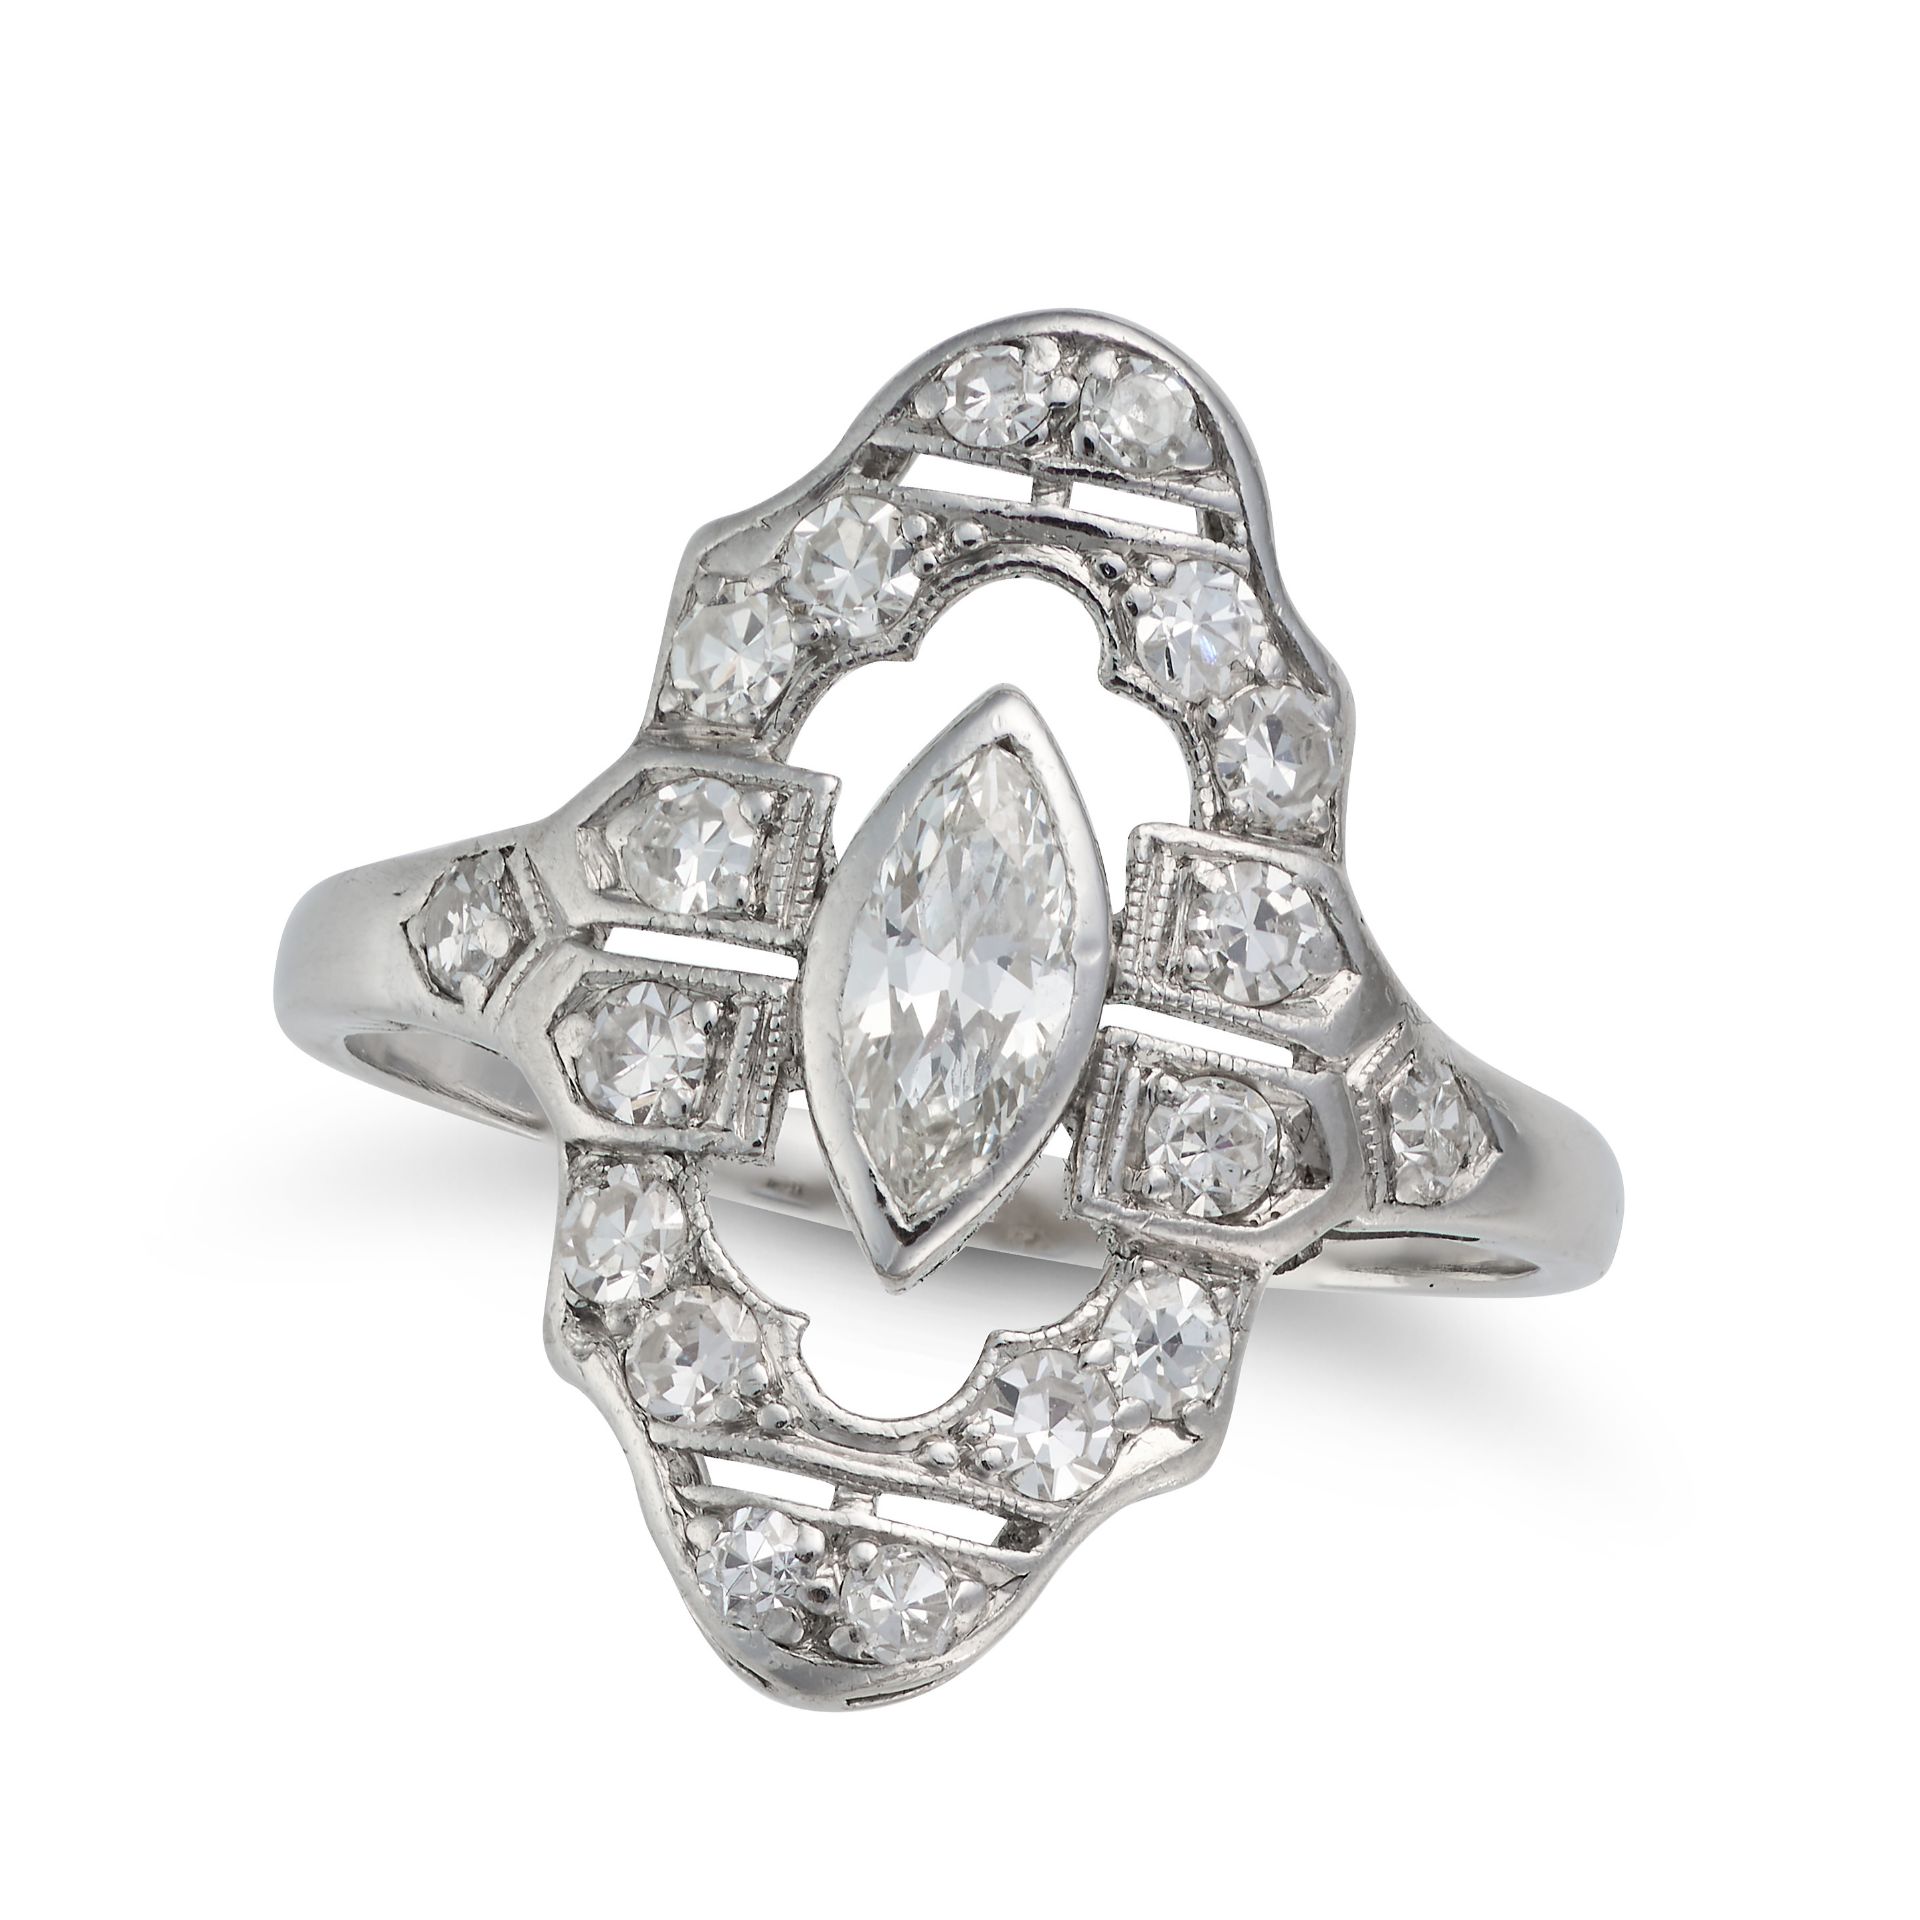 A DIAMOND DRESS RING the openwork face set with a marquise cut diamond, accented by a border of s...